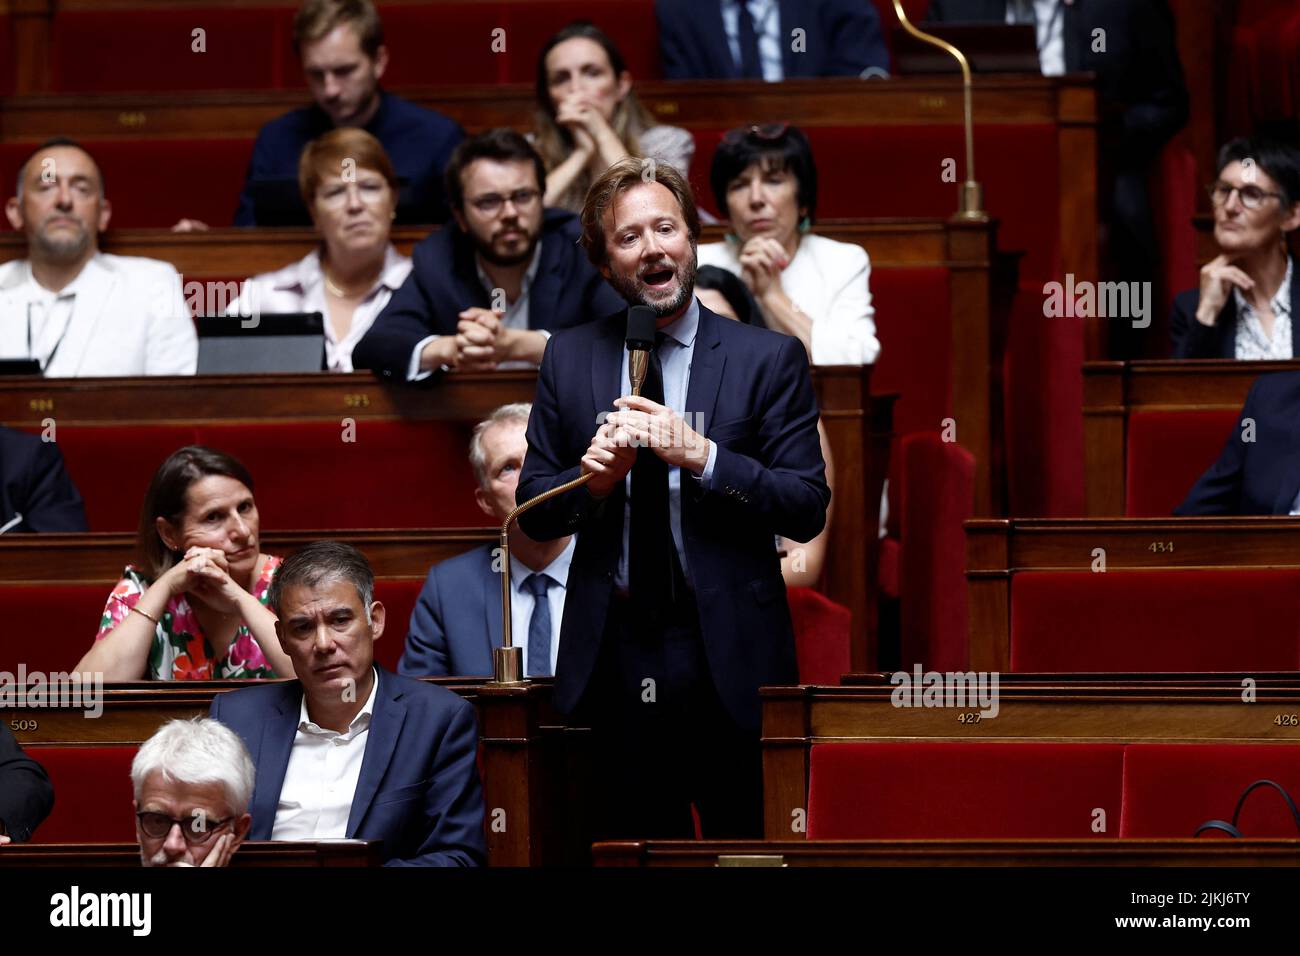 Member of parliament Boris Vallaud speaks during the questions to the government session at the National Assembly in Paris, France, August 2, 2022. REUTERS/Benoit Tessier Stock Photo